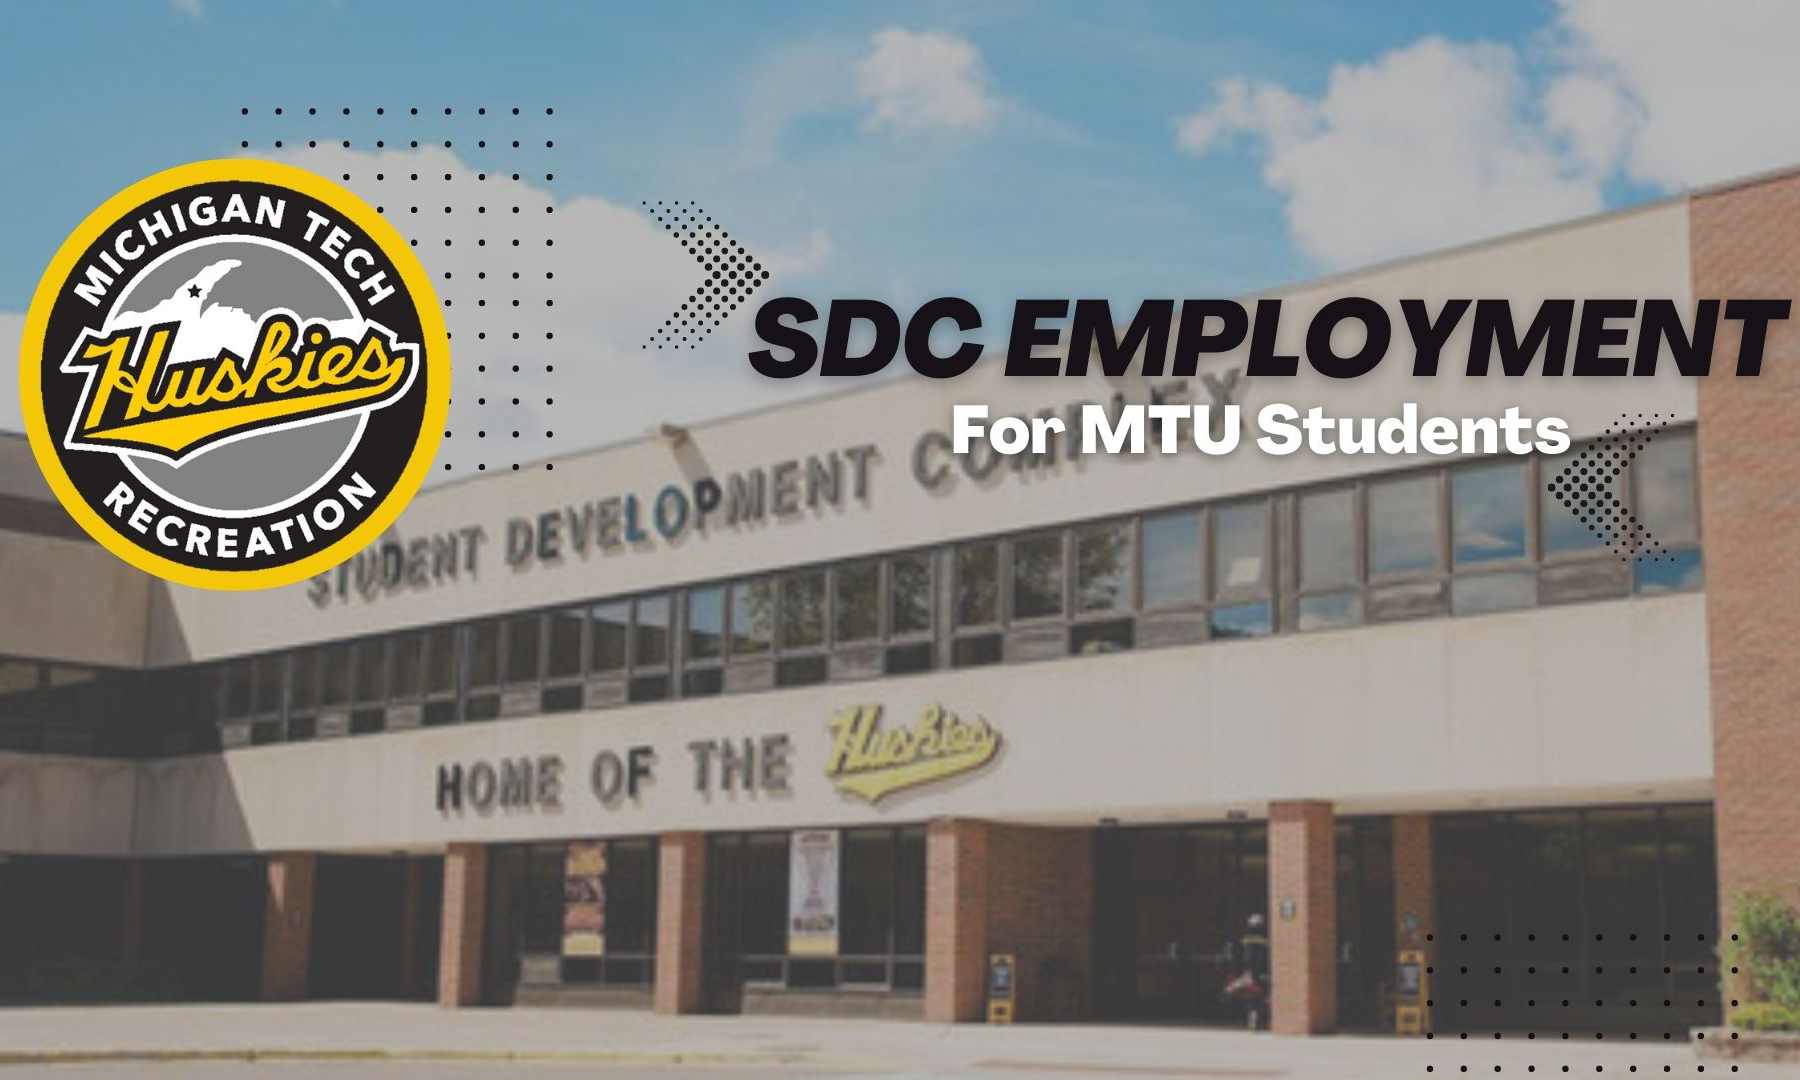 SDC Employment for MTU Students